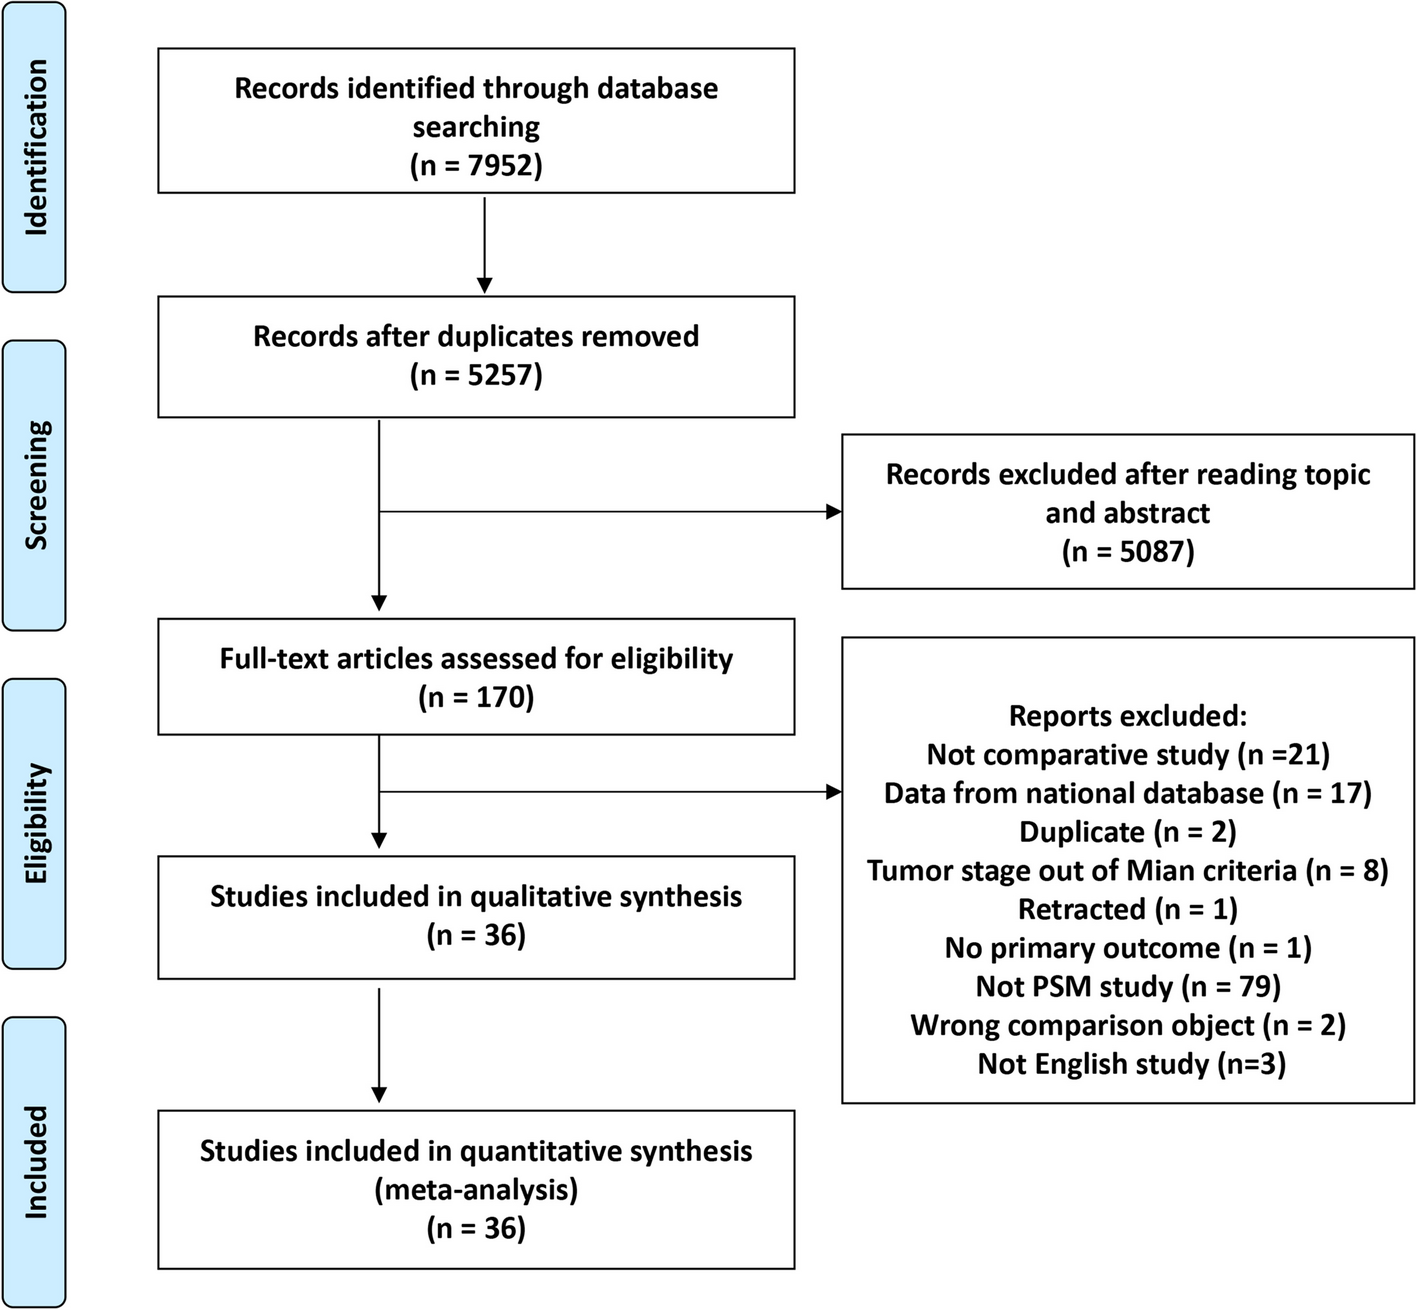 Comparison of liver resection and radiofrequency ablation in long-term survival among patients with early-stage hepatocellular carcinoma: a meta-analysis of randomized trials and high-quality propensity score-matched studies